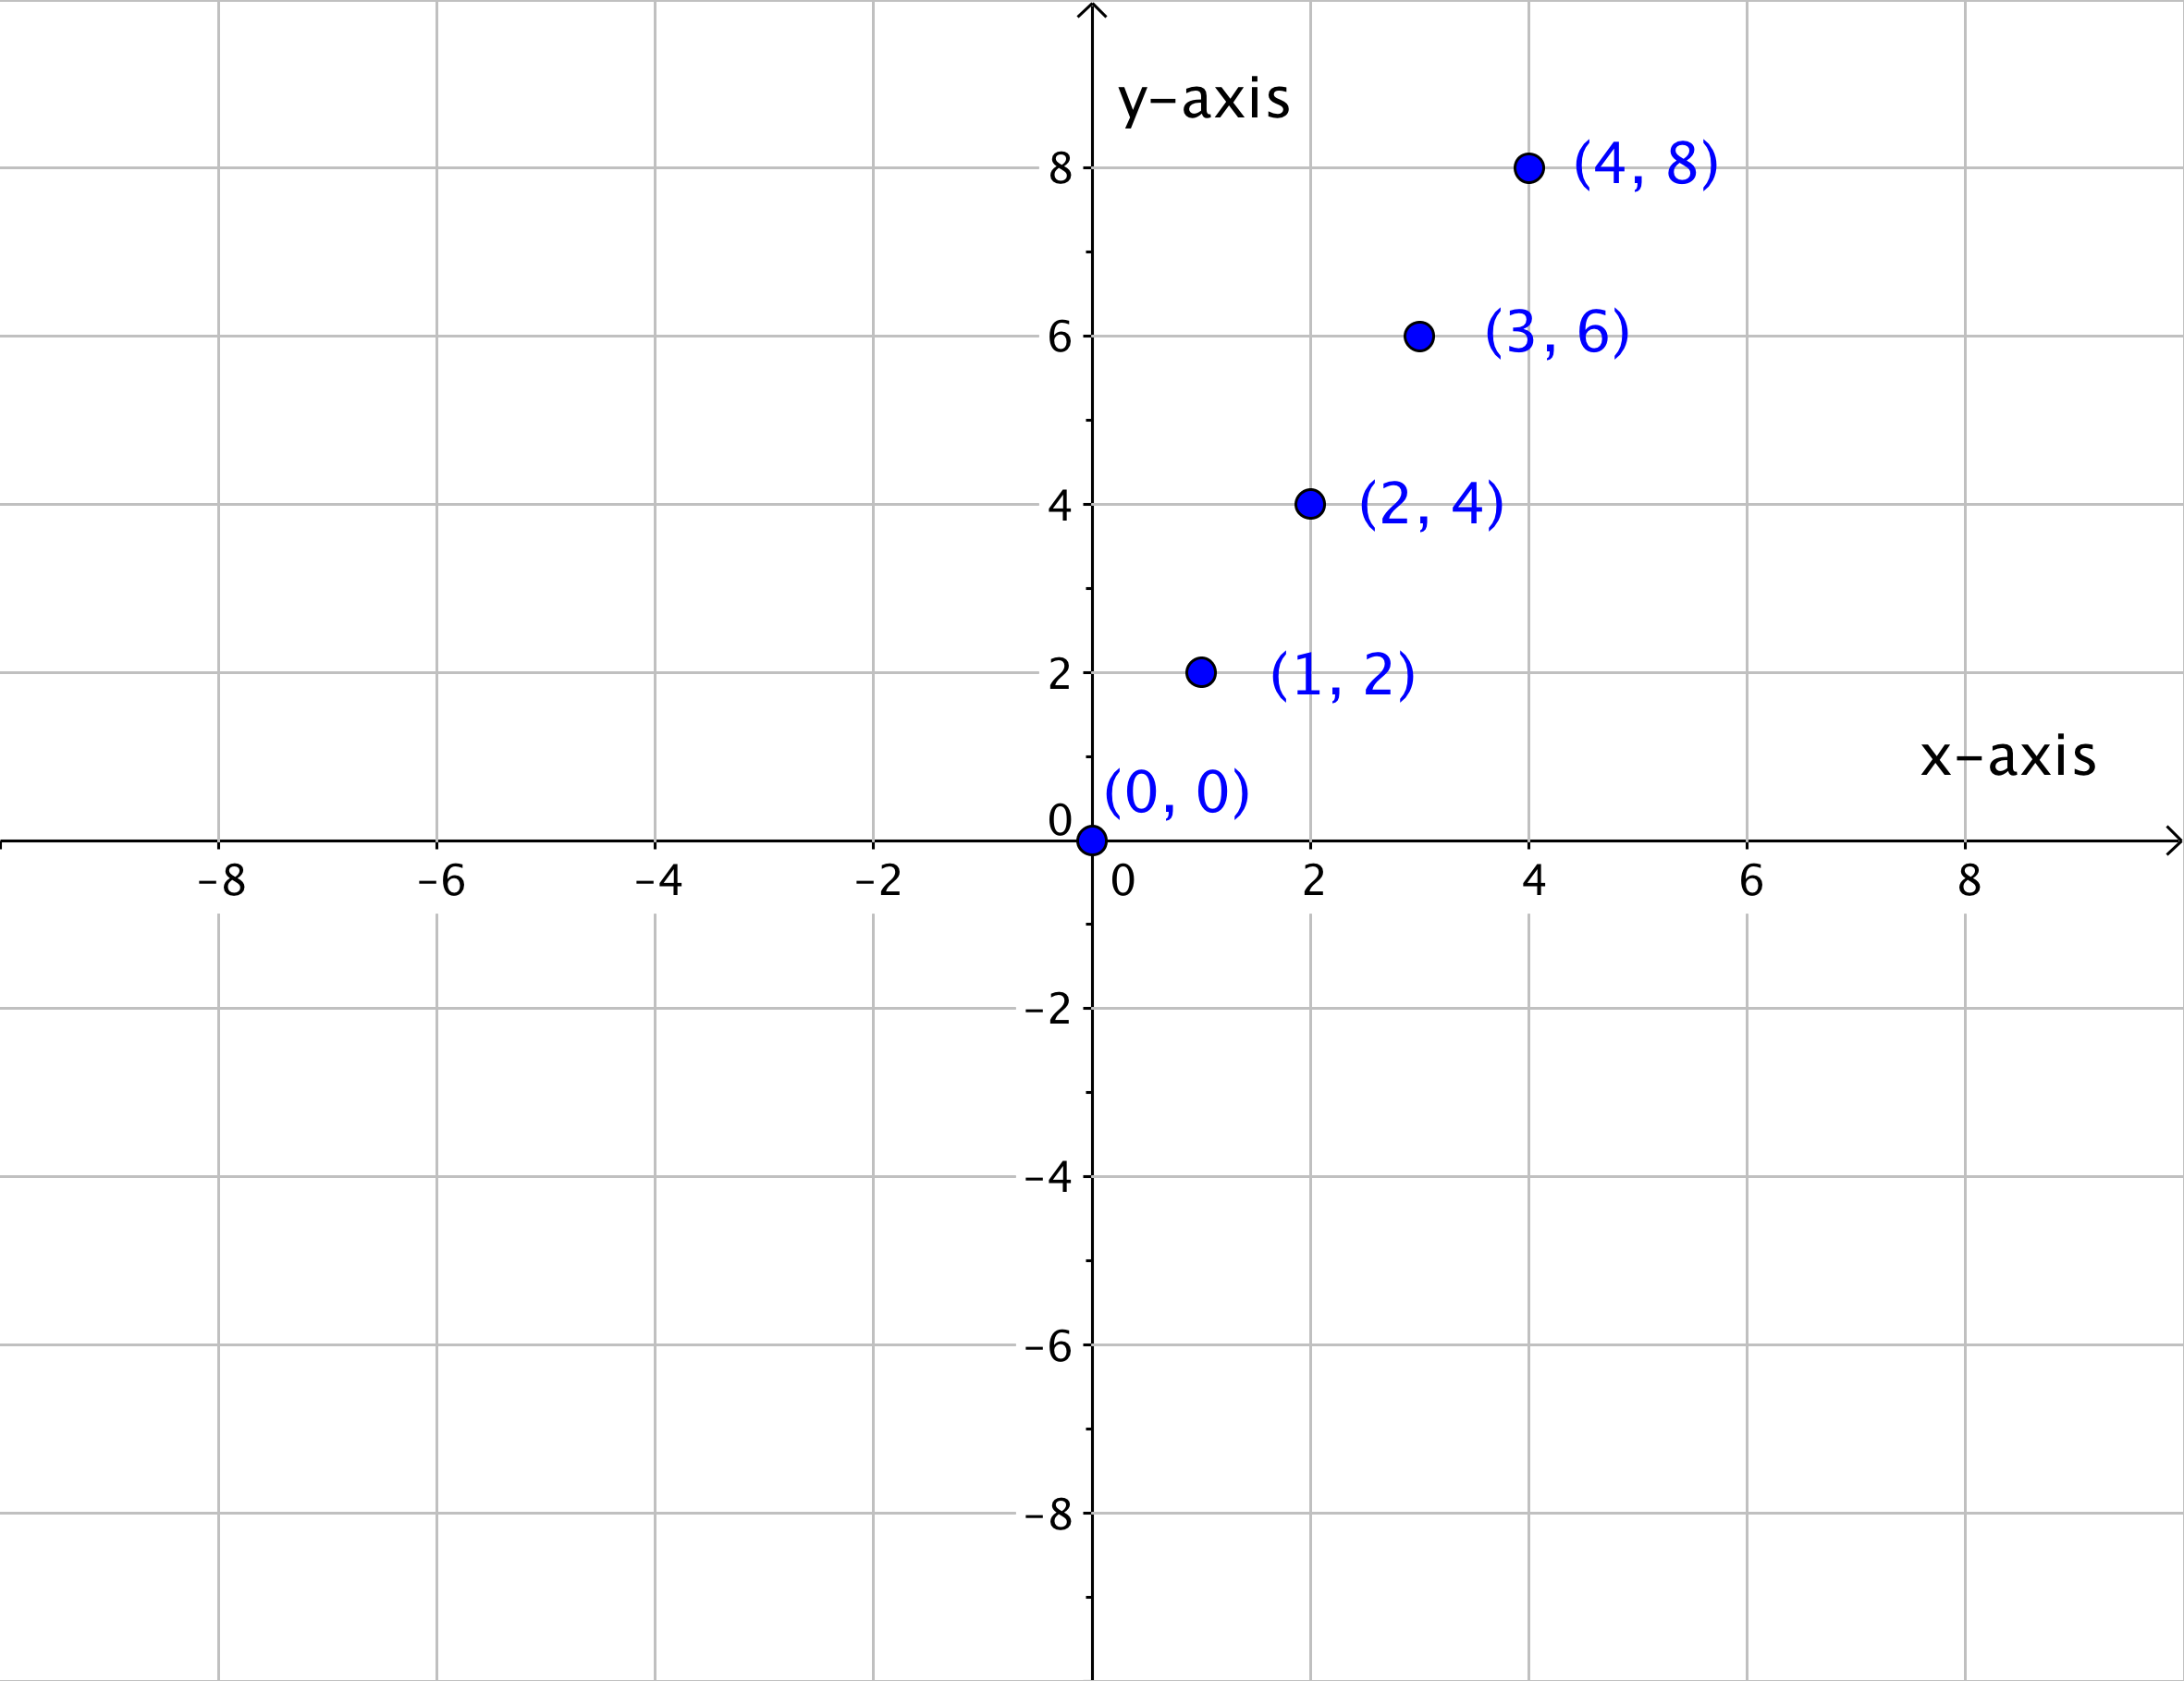 Graph with the point (0,0); the point (1,2); the point (2,4); the point (3,6); and the point (4,8).